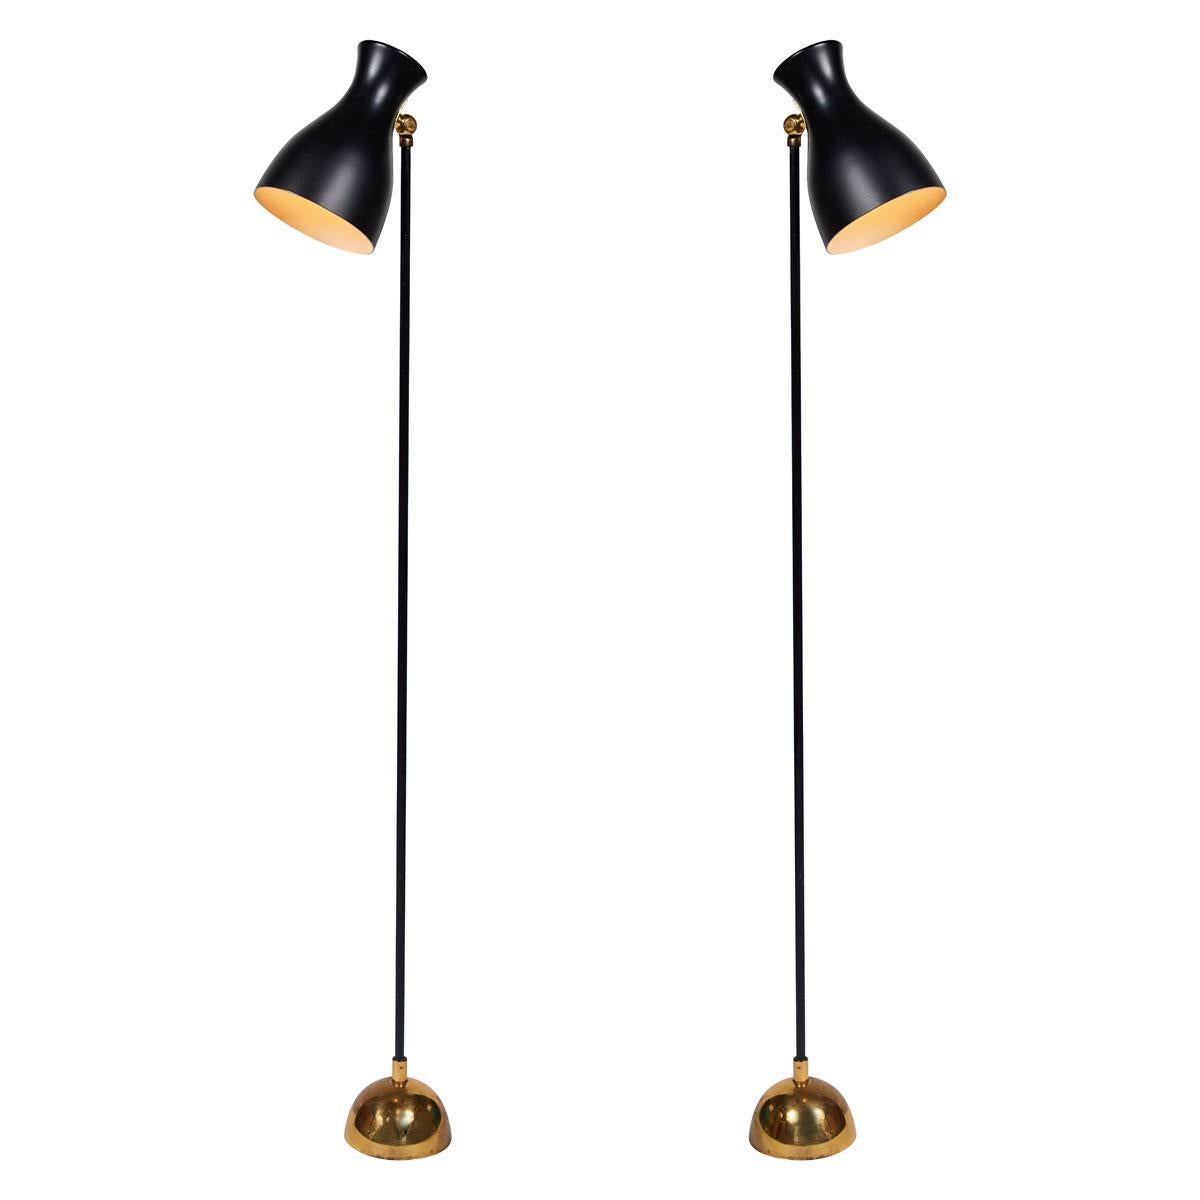 Dieter Schulz Model No. 57/4 16 floor lamp for Wohnbedarf AG Schweiz, 1957. Executed in black enameled metal and brass. A quintessentially midcentury European design that is highly functional and incomparably refined. Reminiscent of and often